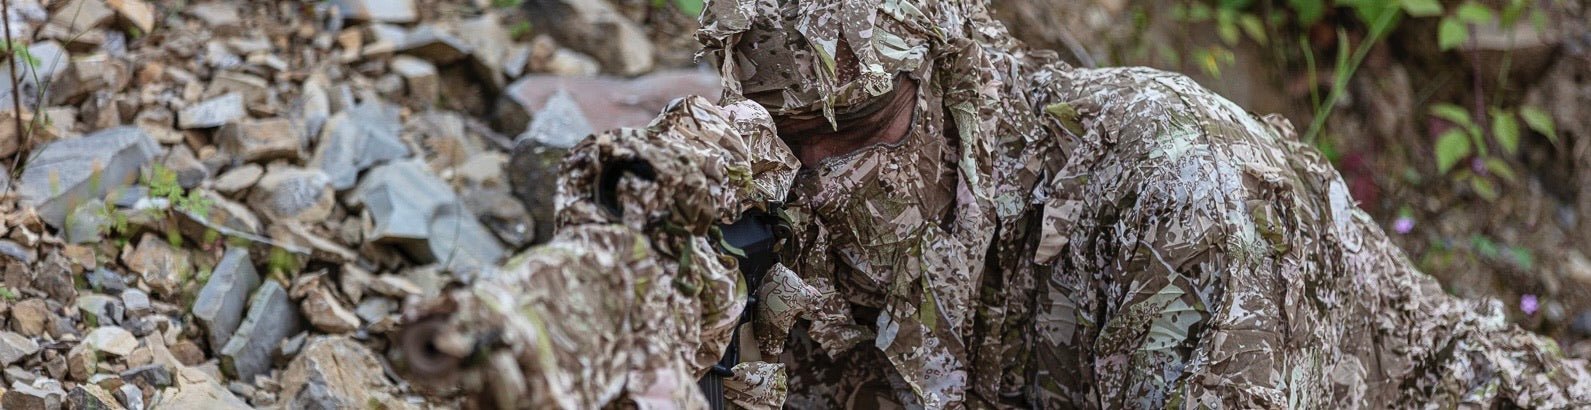 Camouflage du corps